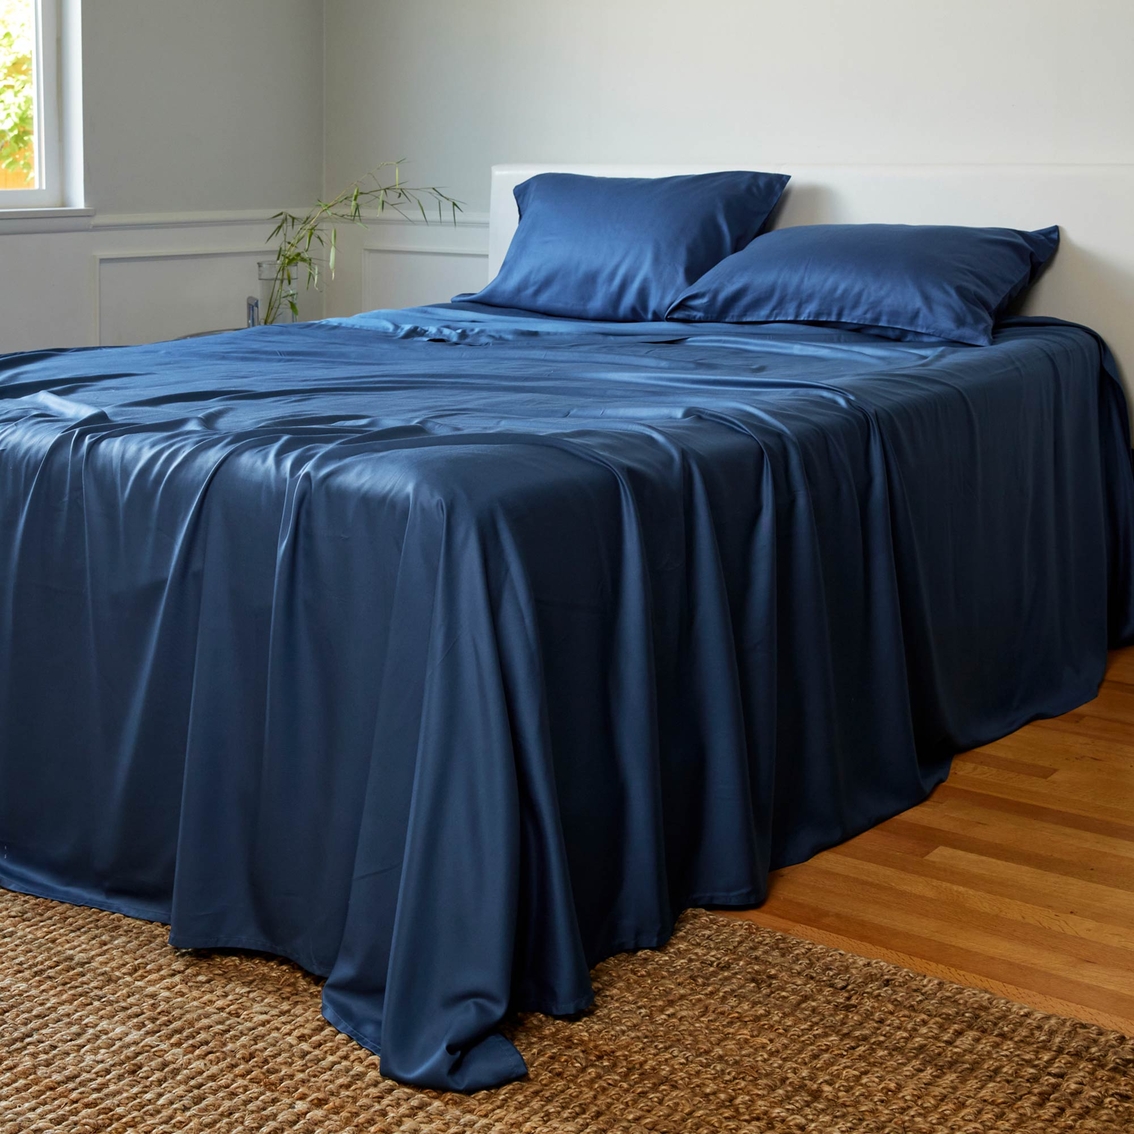 BedVoyage Rayon from Bamboo Sheet Set - Image 5 of 9